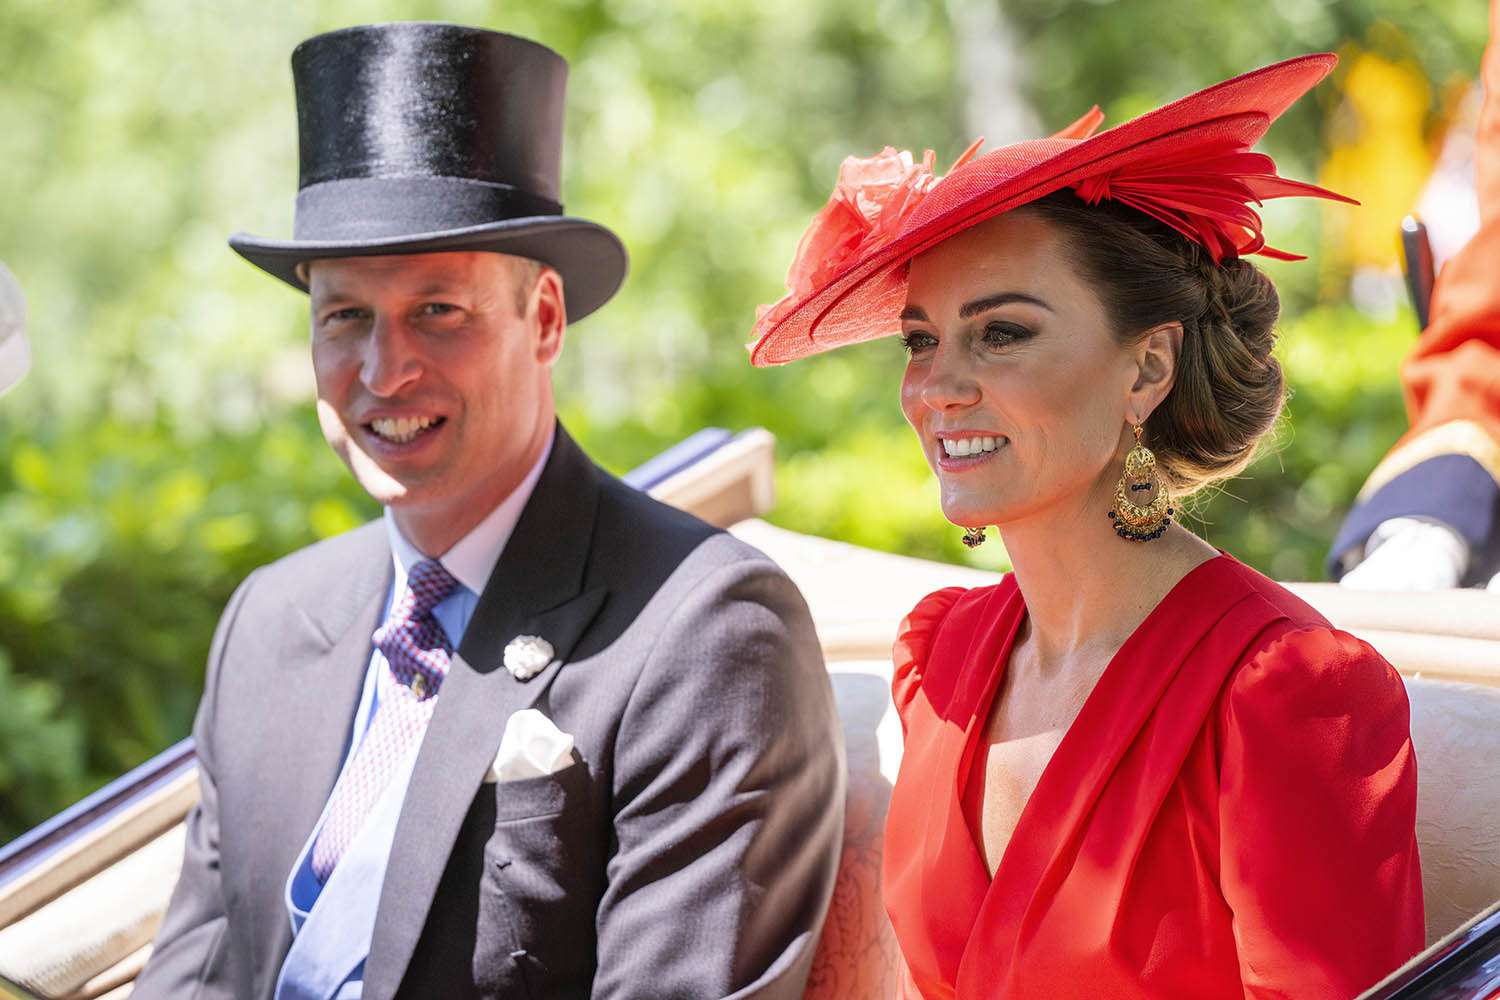 Prince William with his wife Keith Middleton. Source: British Magazine 